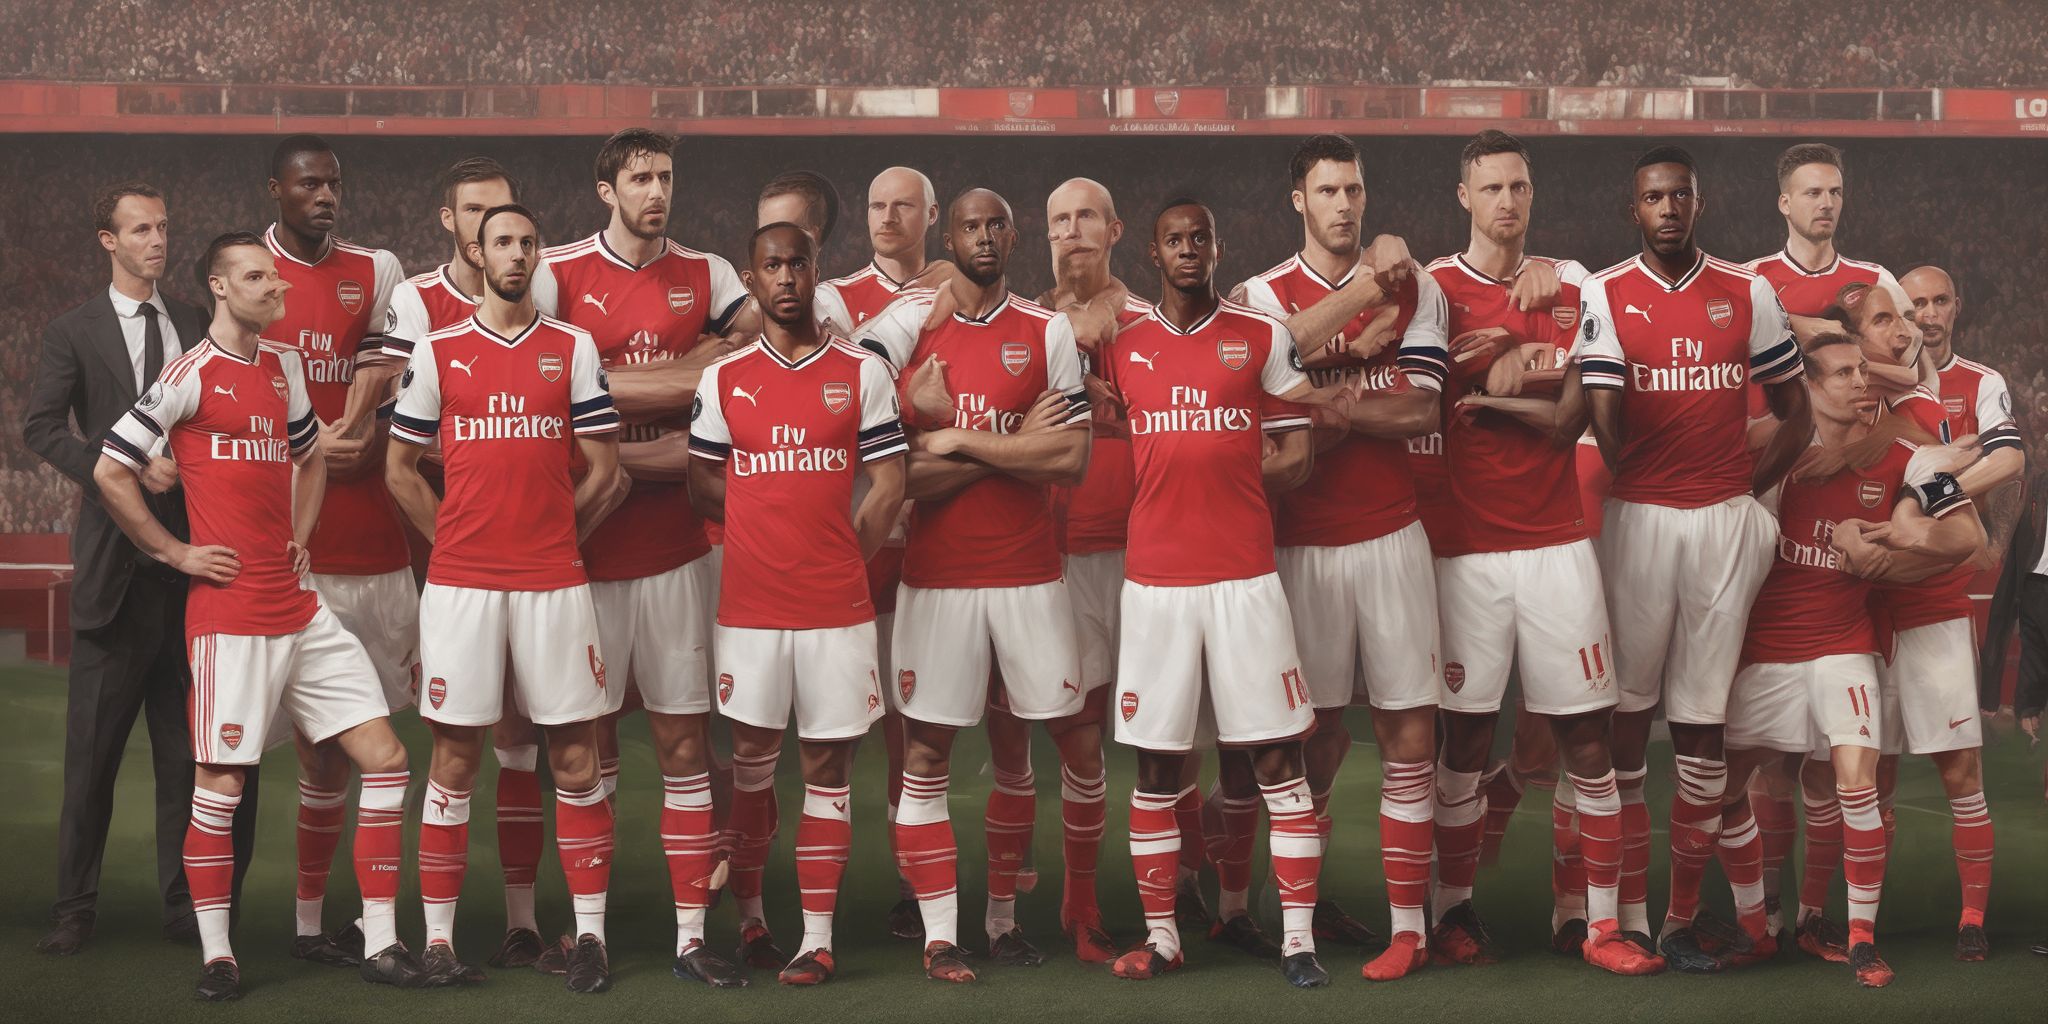 Arsenal  in realistic, photographic style